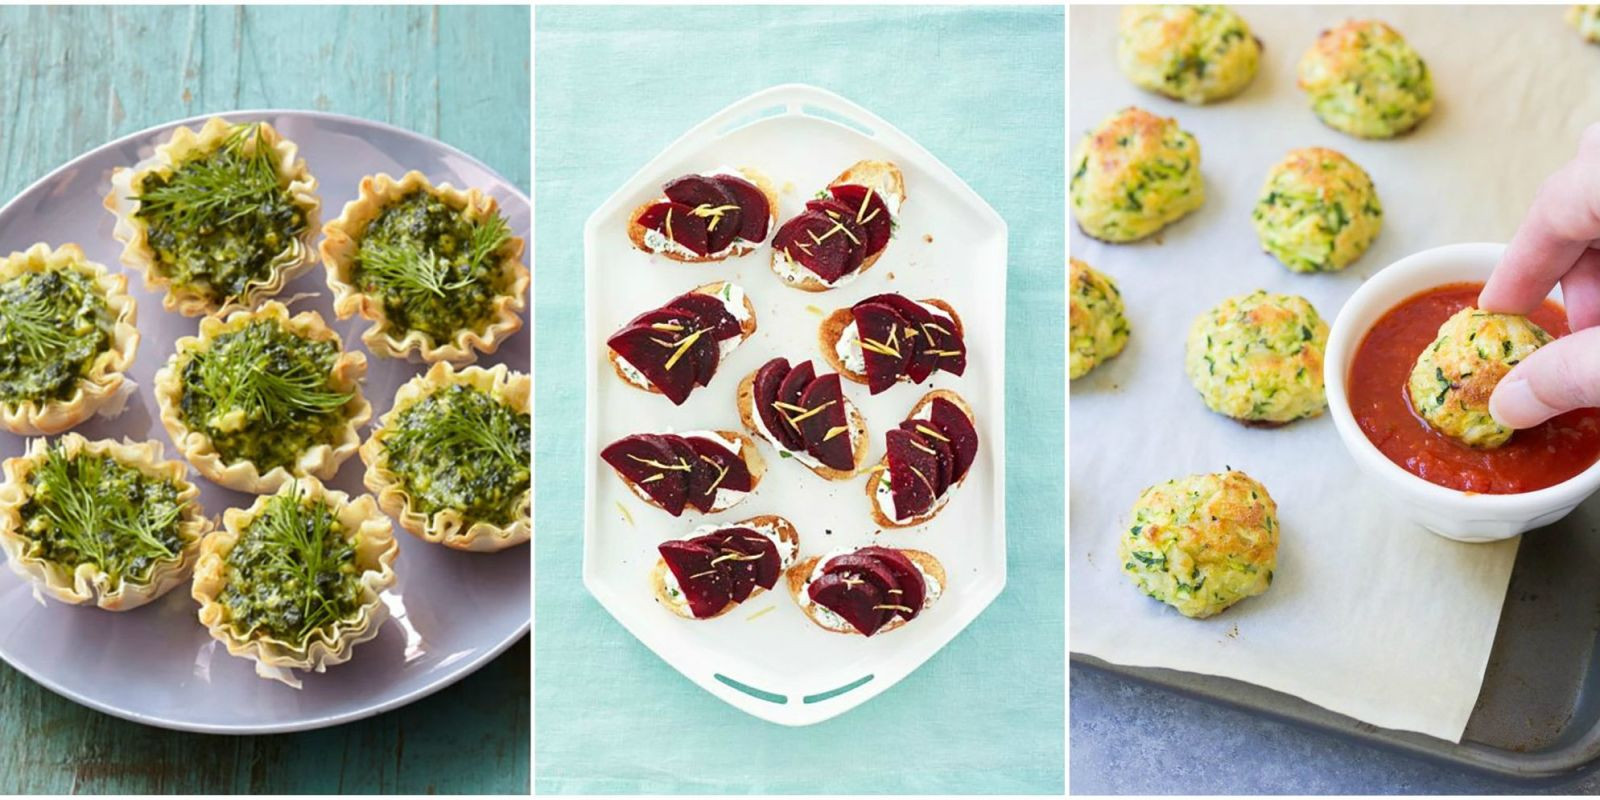 Simple Healthy Appetizers
 15 Easy Healthy Appetizers Best Recipes for Party